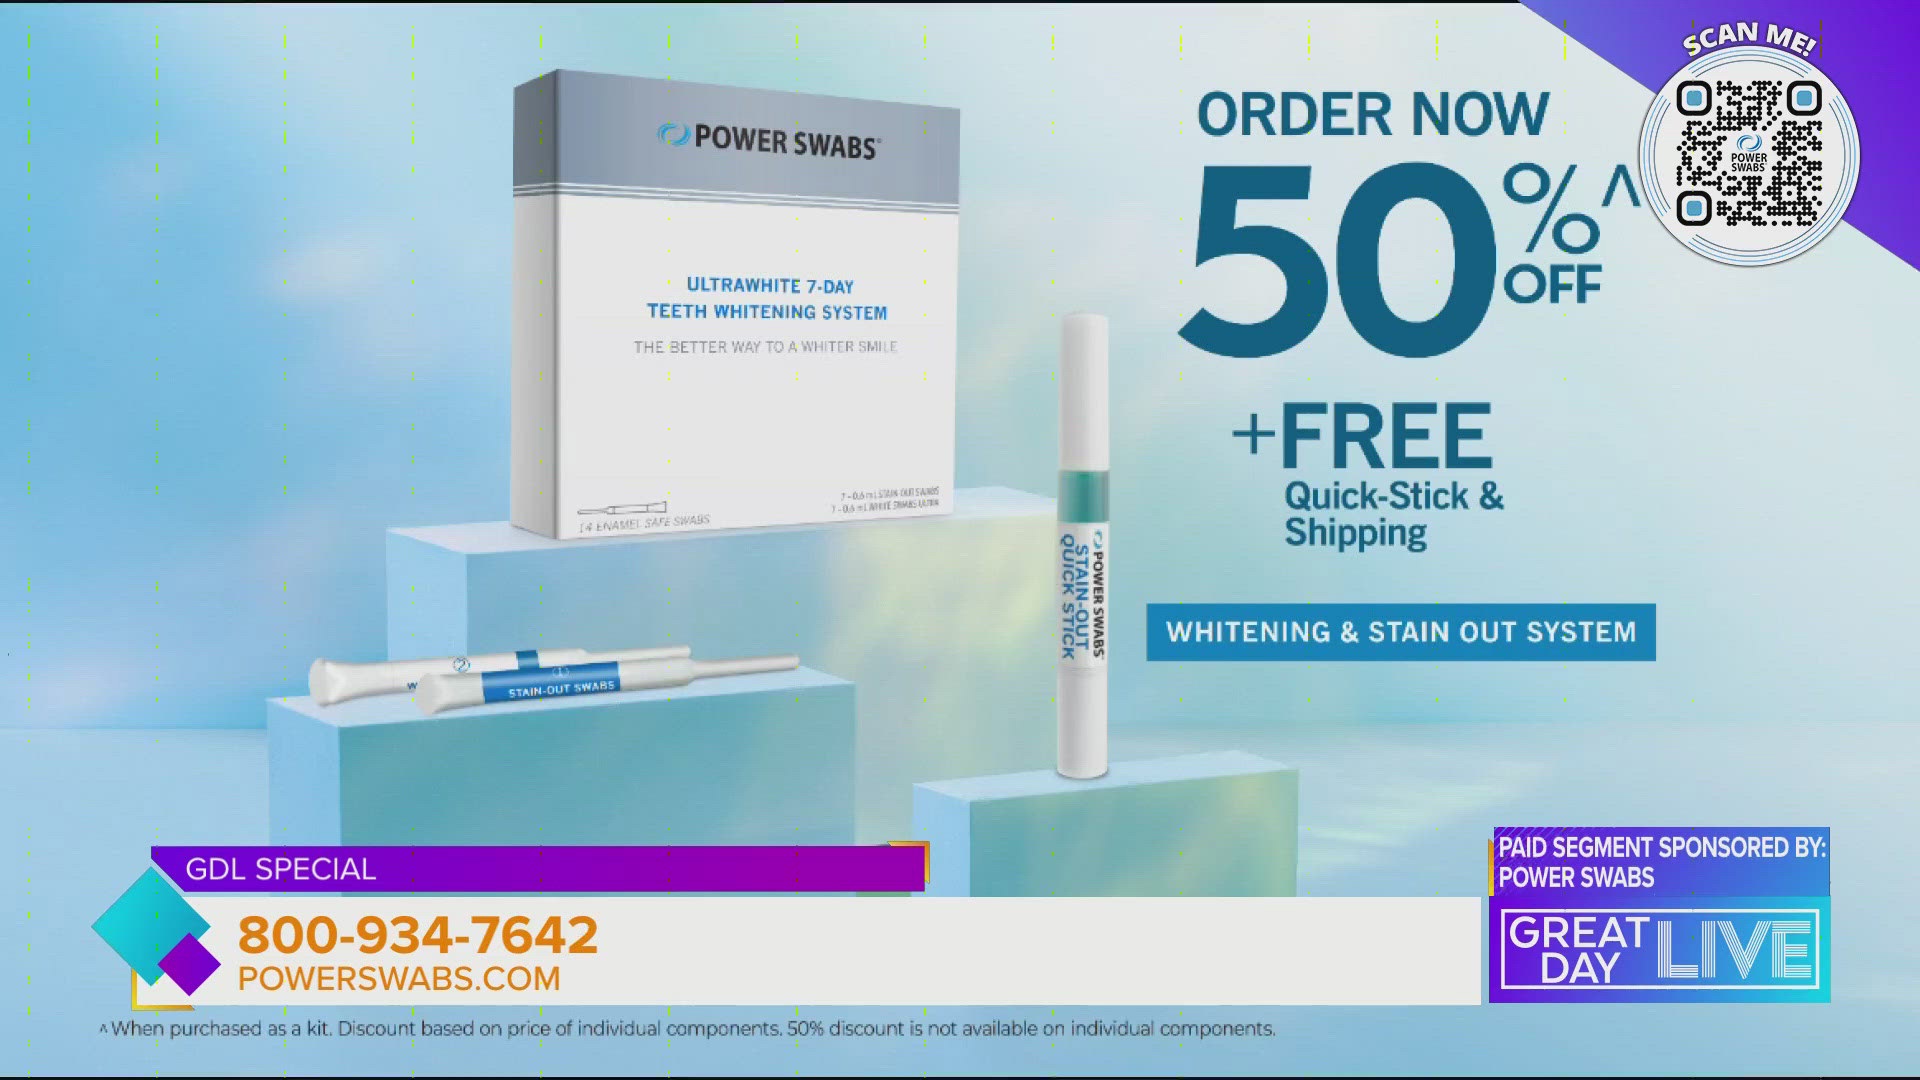 Get in on this GDL special with 50% off if you call 800-934-7642 or go to https://swabs.pw/3yt11Xr